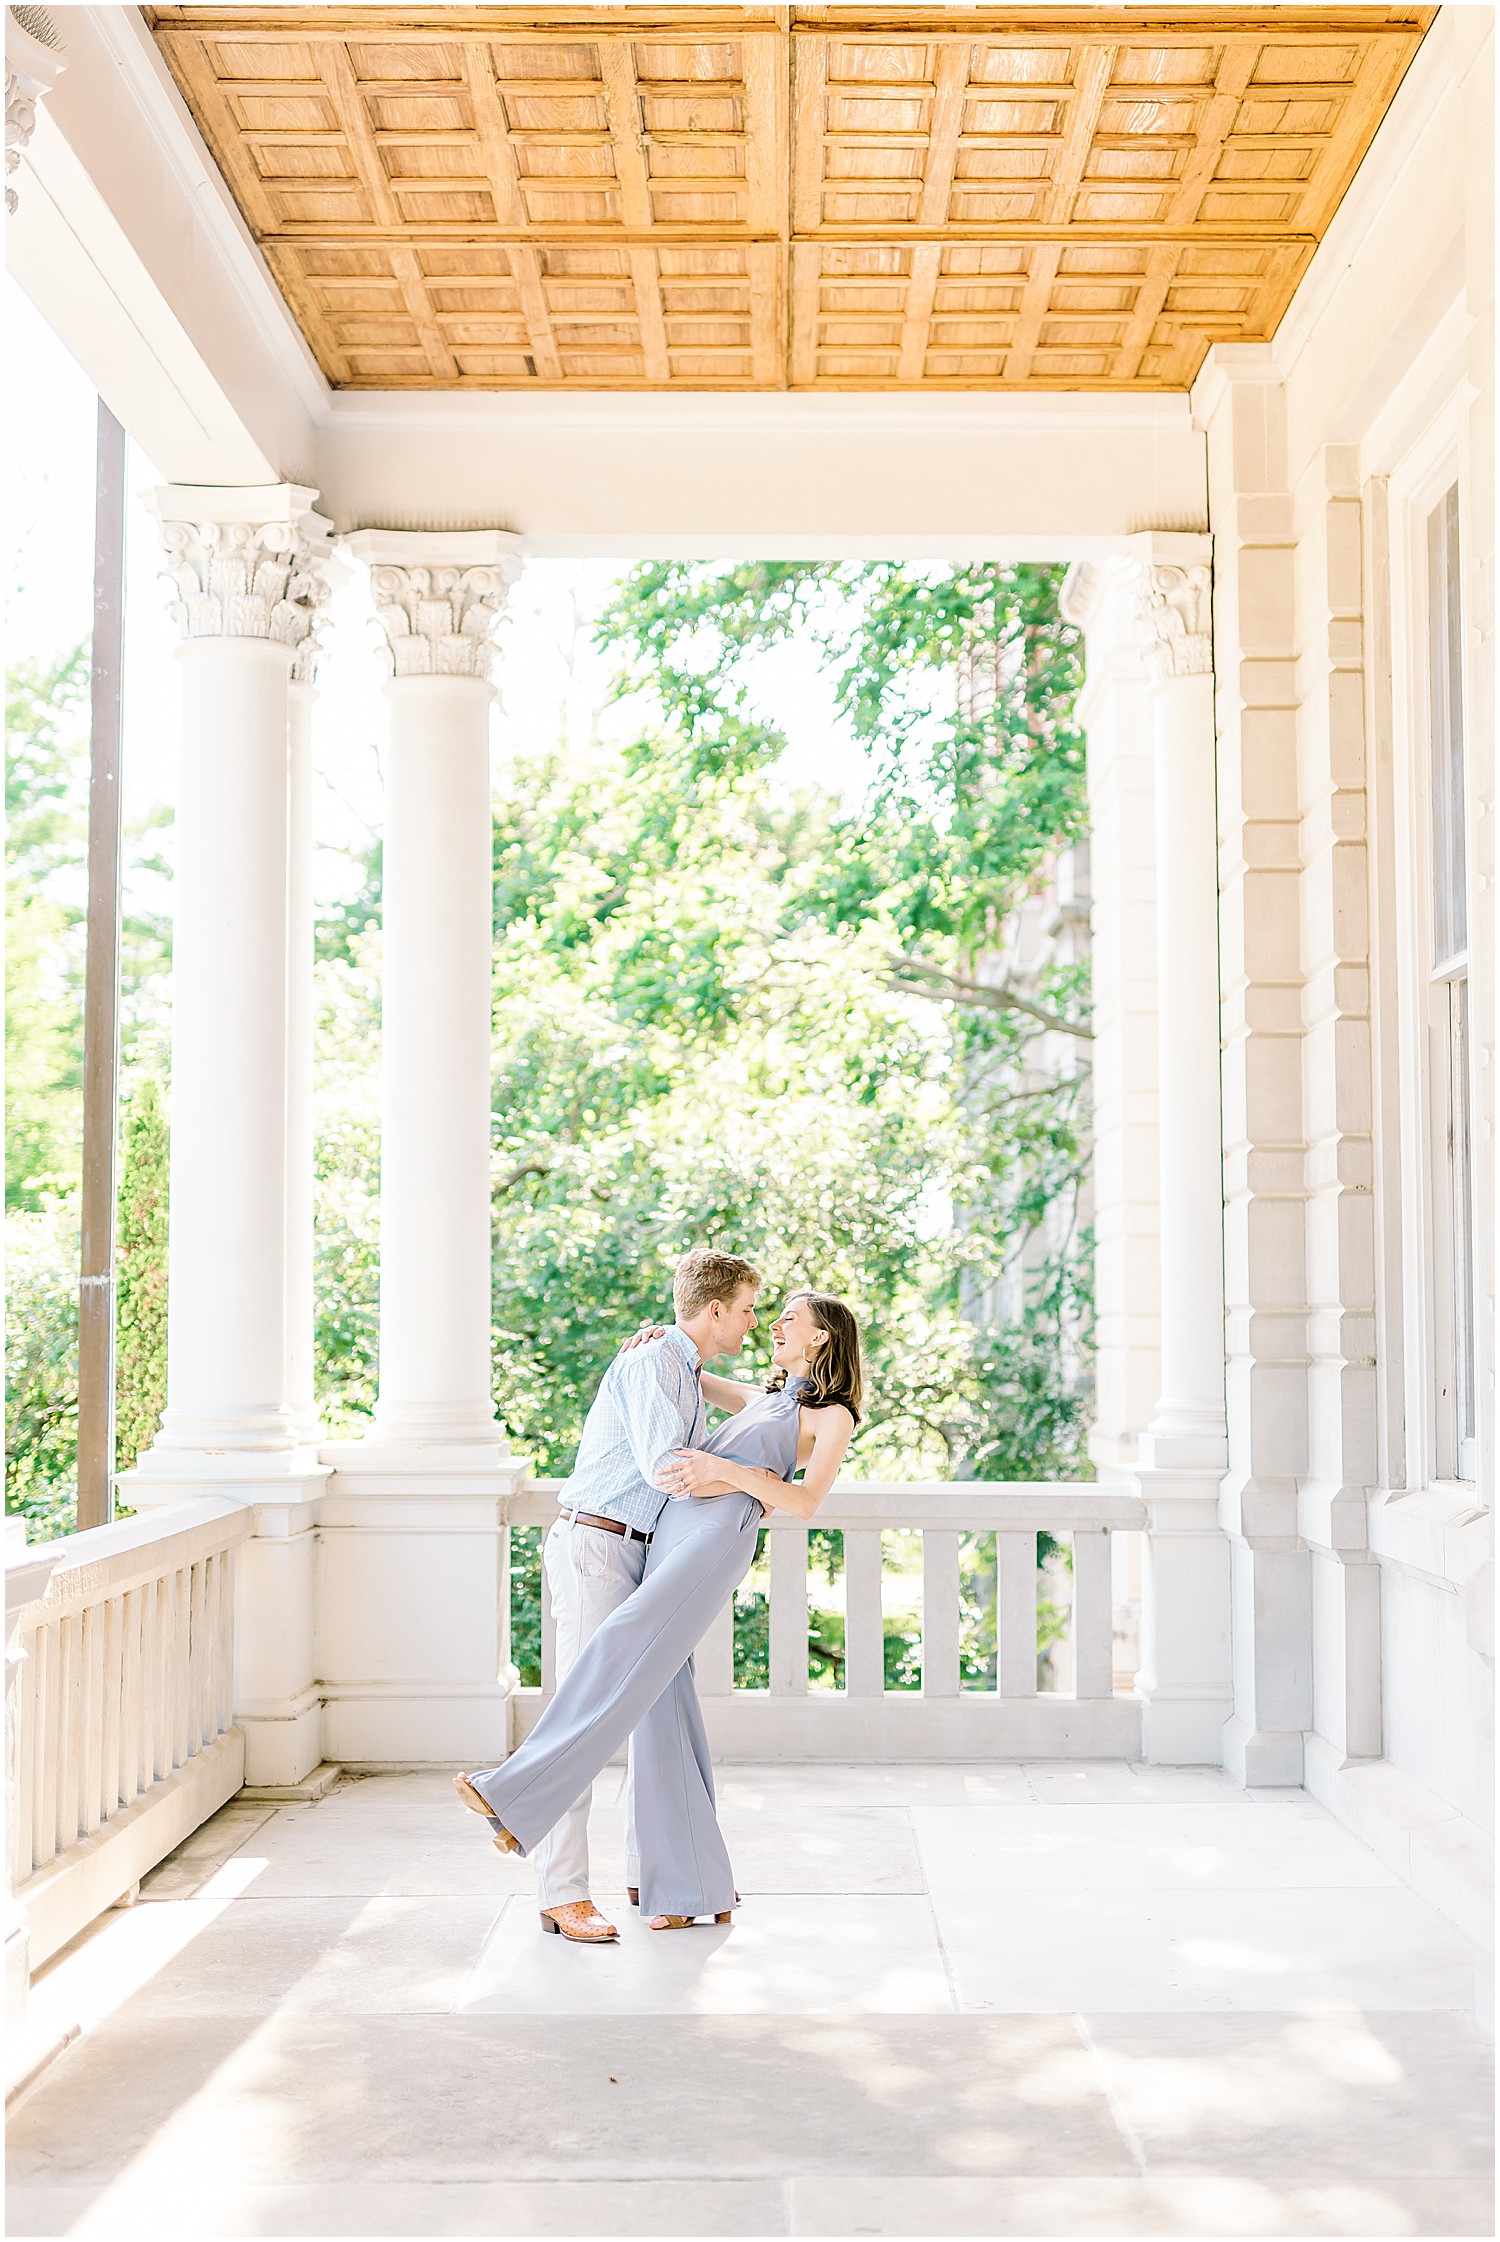 engaged couple on a large porch on mizzou campus jesse hall kissing and dancing